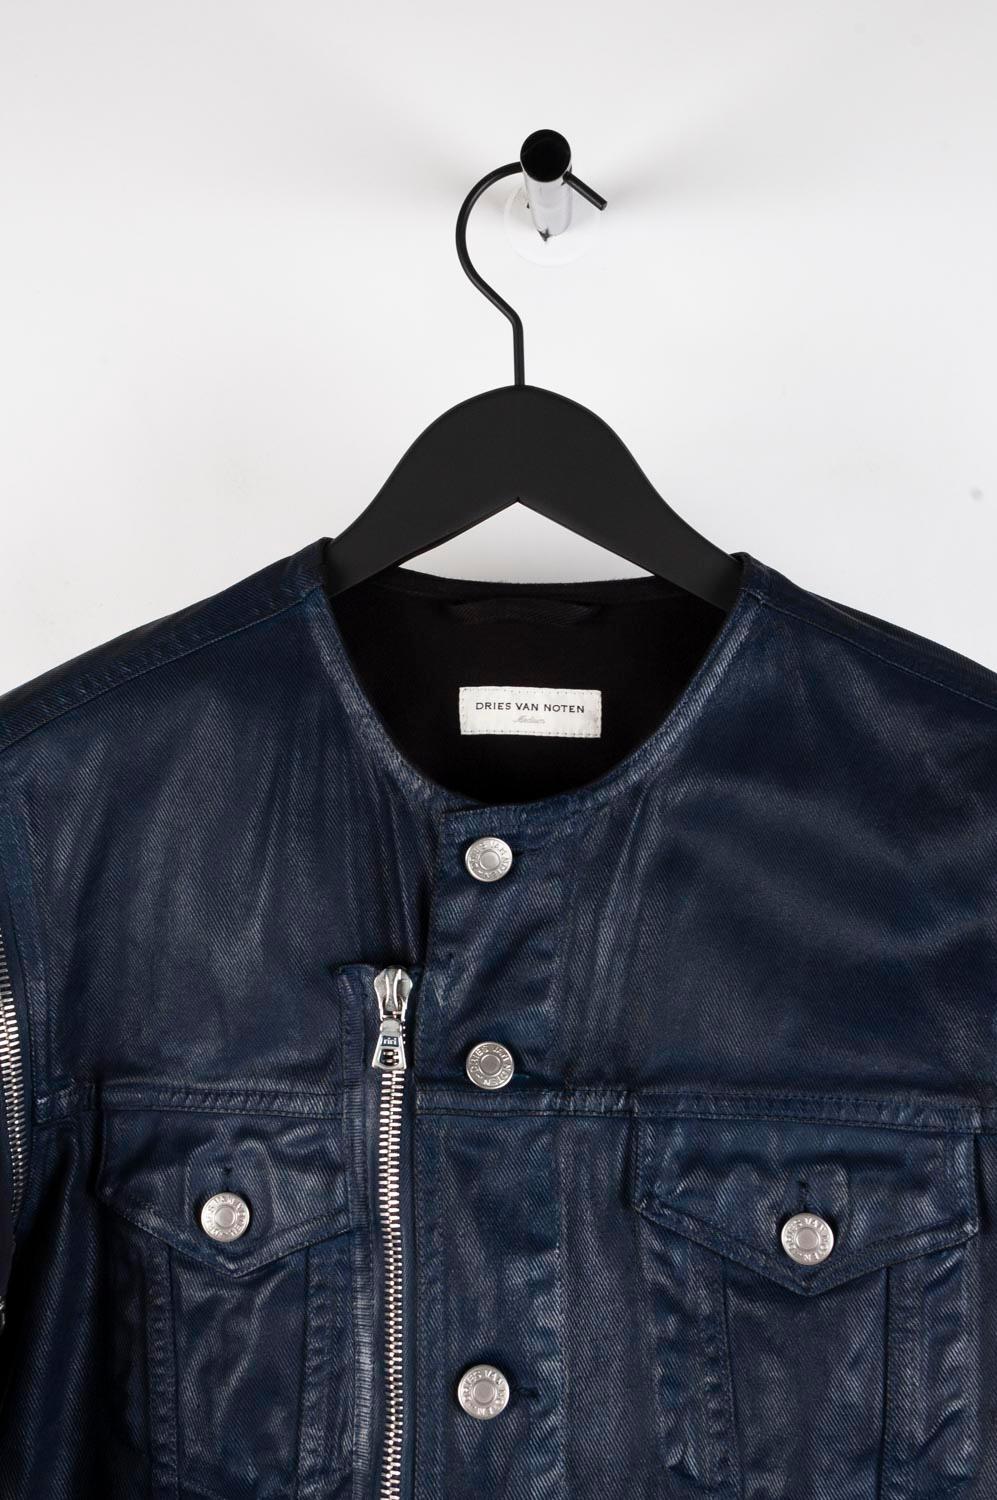 Item for sale is 100% genuine Dries Van Noten Removable Sleeves Detail Coated Men Jacket 
Color: Navy
(An actual color may a bit vary due to individual computer screen interpretation)
Material: 100% cotton
Tag size: M
This jacket is great quality